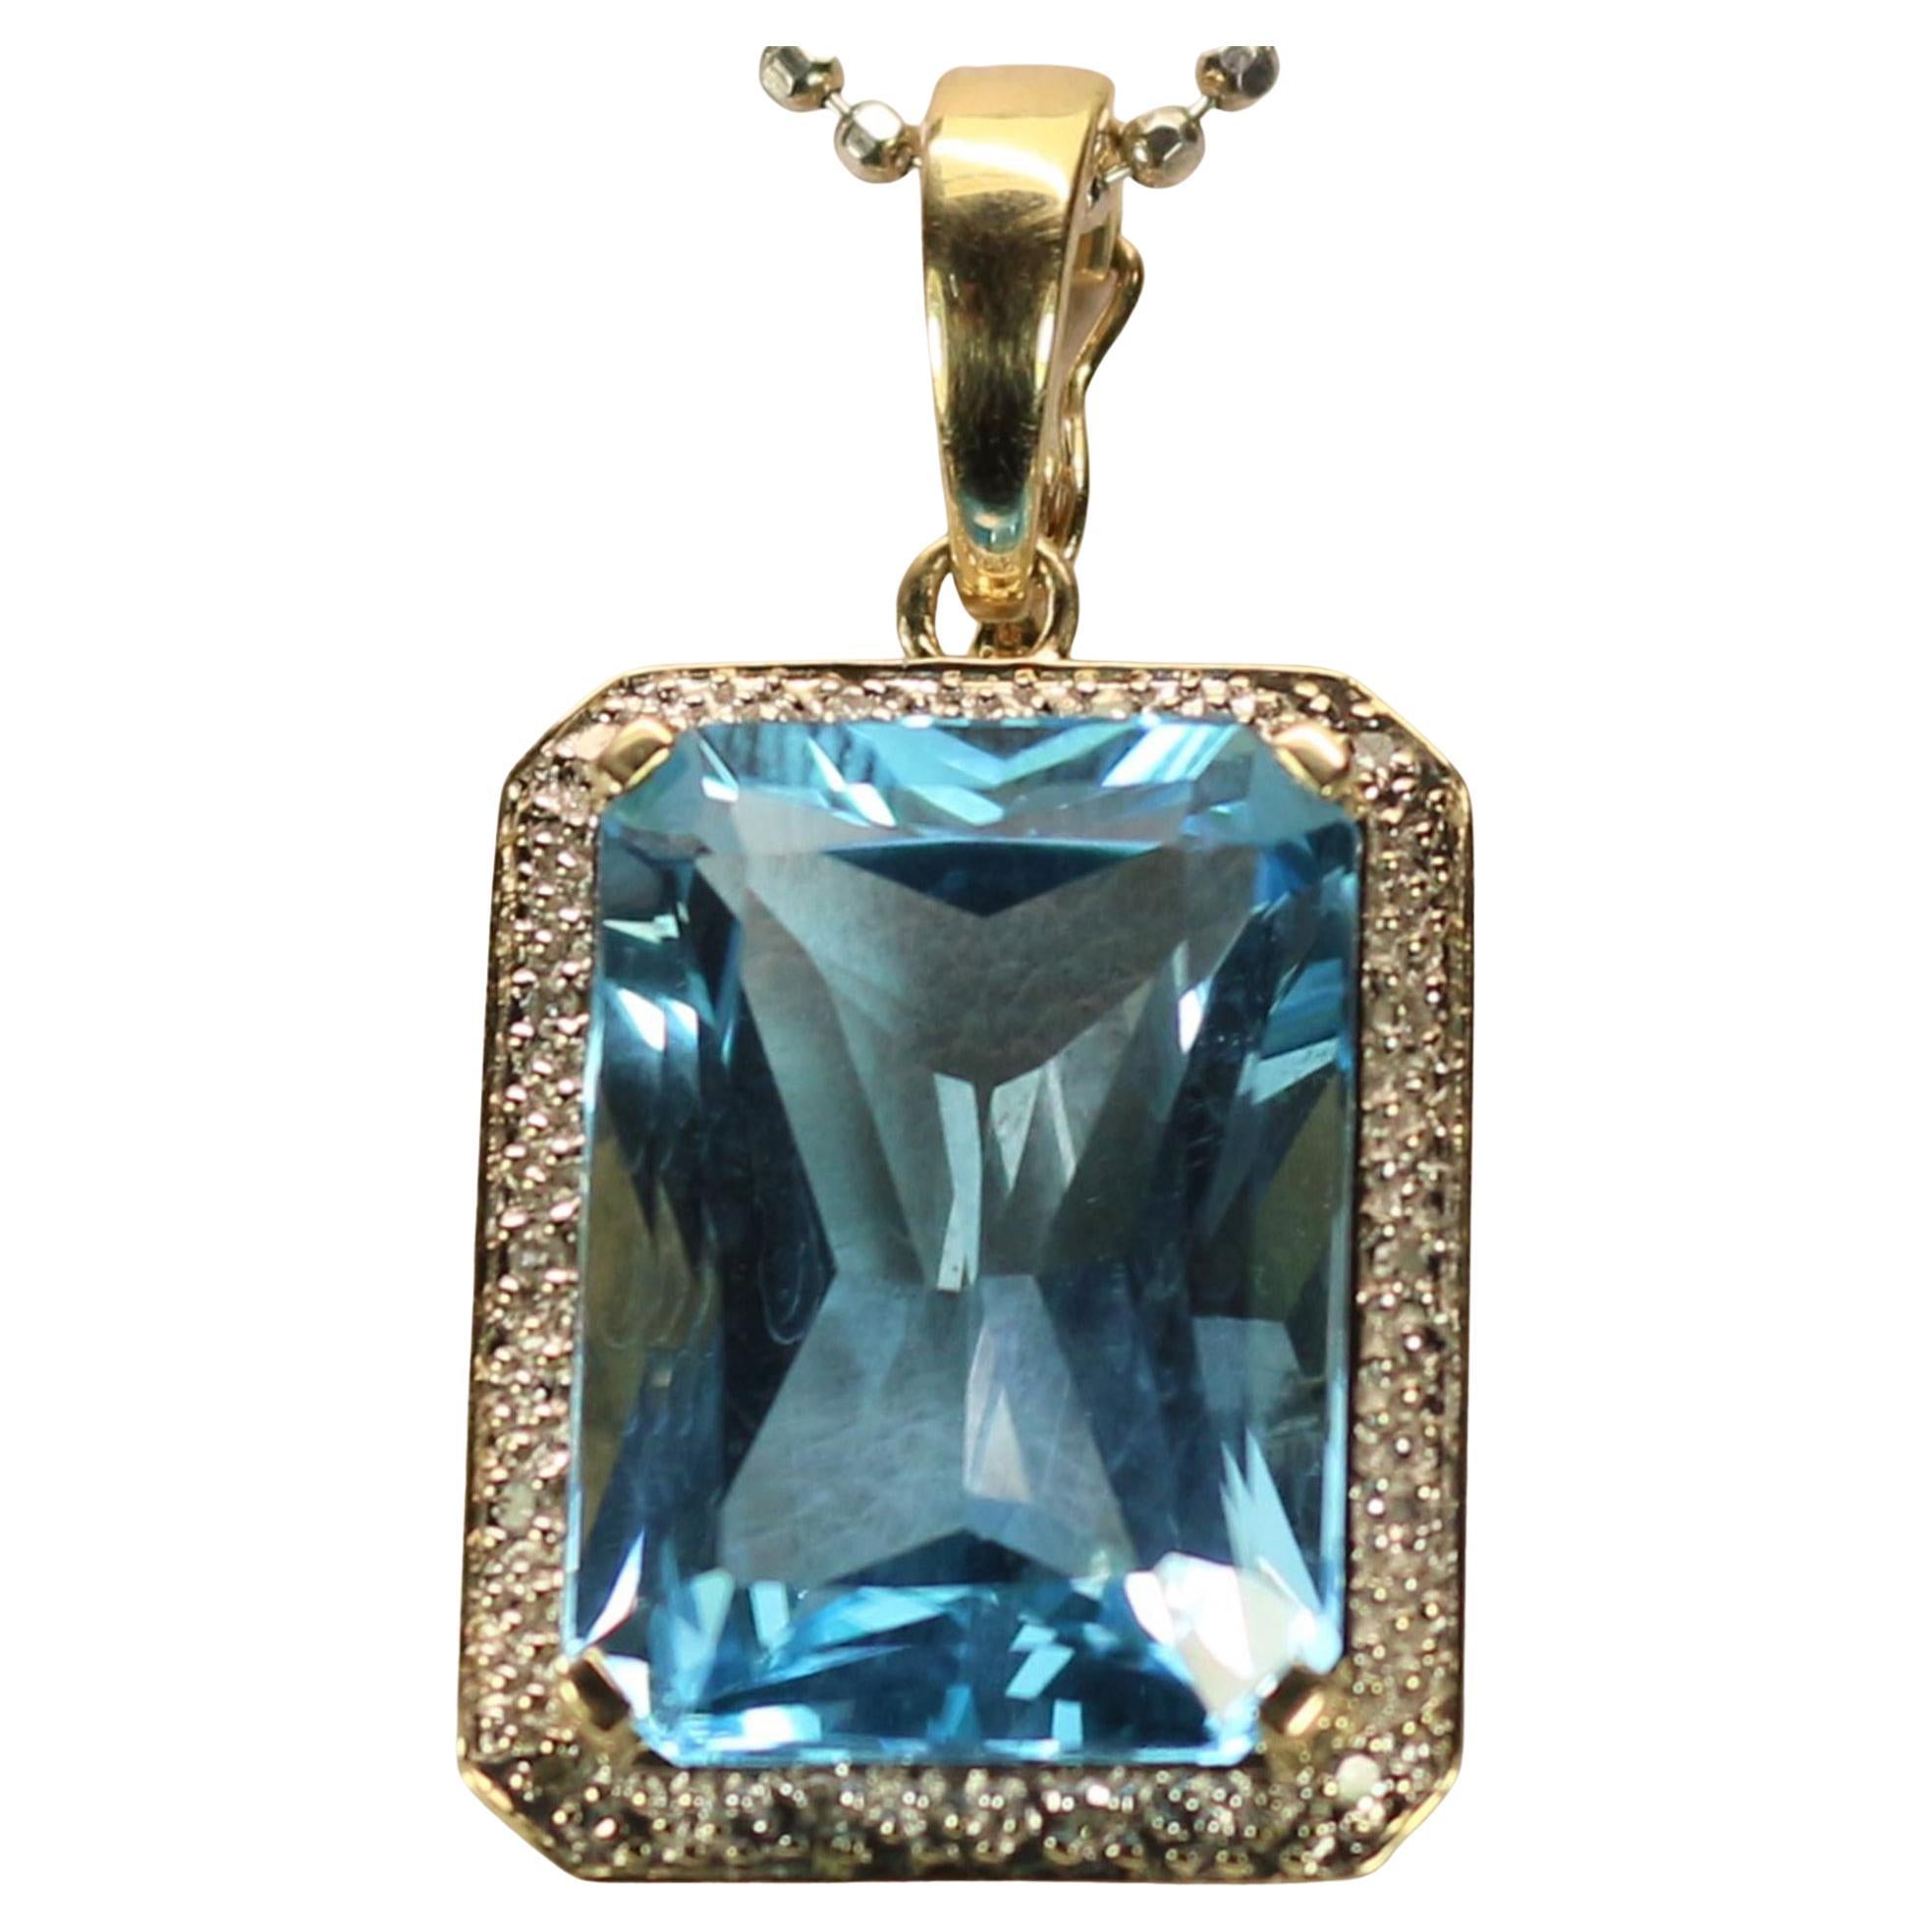 Very large Vario clip pendant 585 white and yellow gold, Swissblue blue topaz diamonds - 19579 -
On the side, 14 diamond roses are inserted. The Swiss blue topaz  is completely surrounded by diamonds.

Depth  9.3 mm
Length 31.8 mm, without clip 21.3